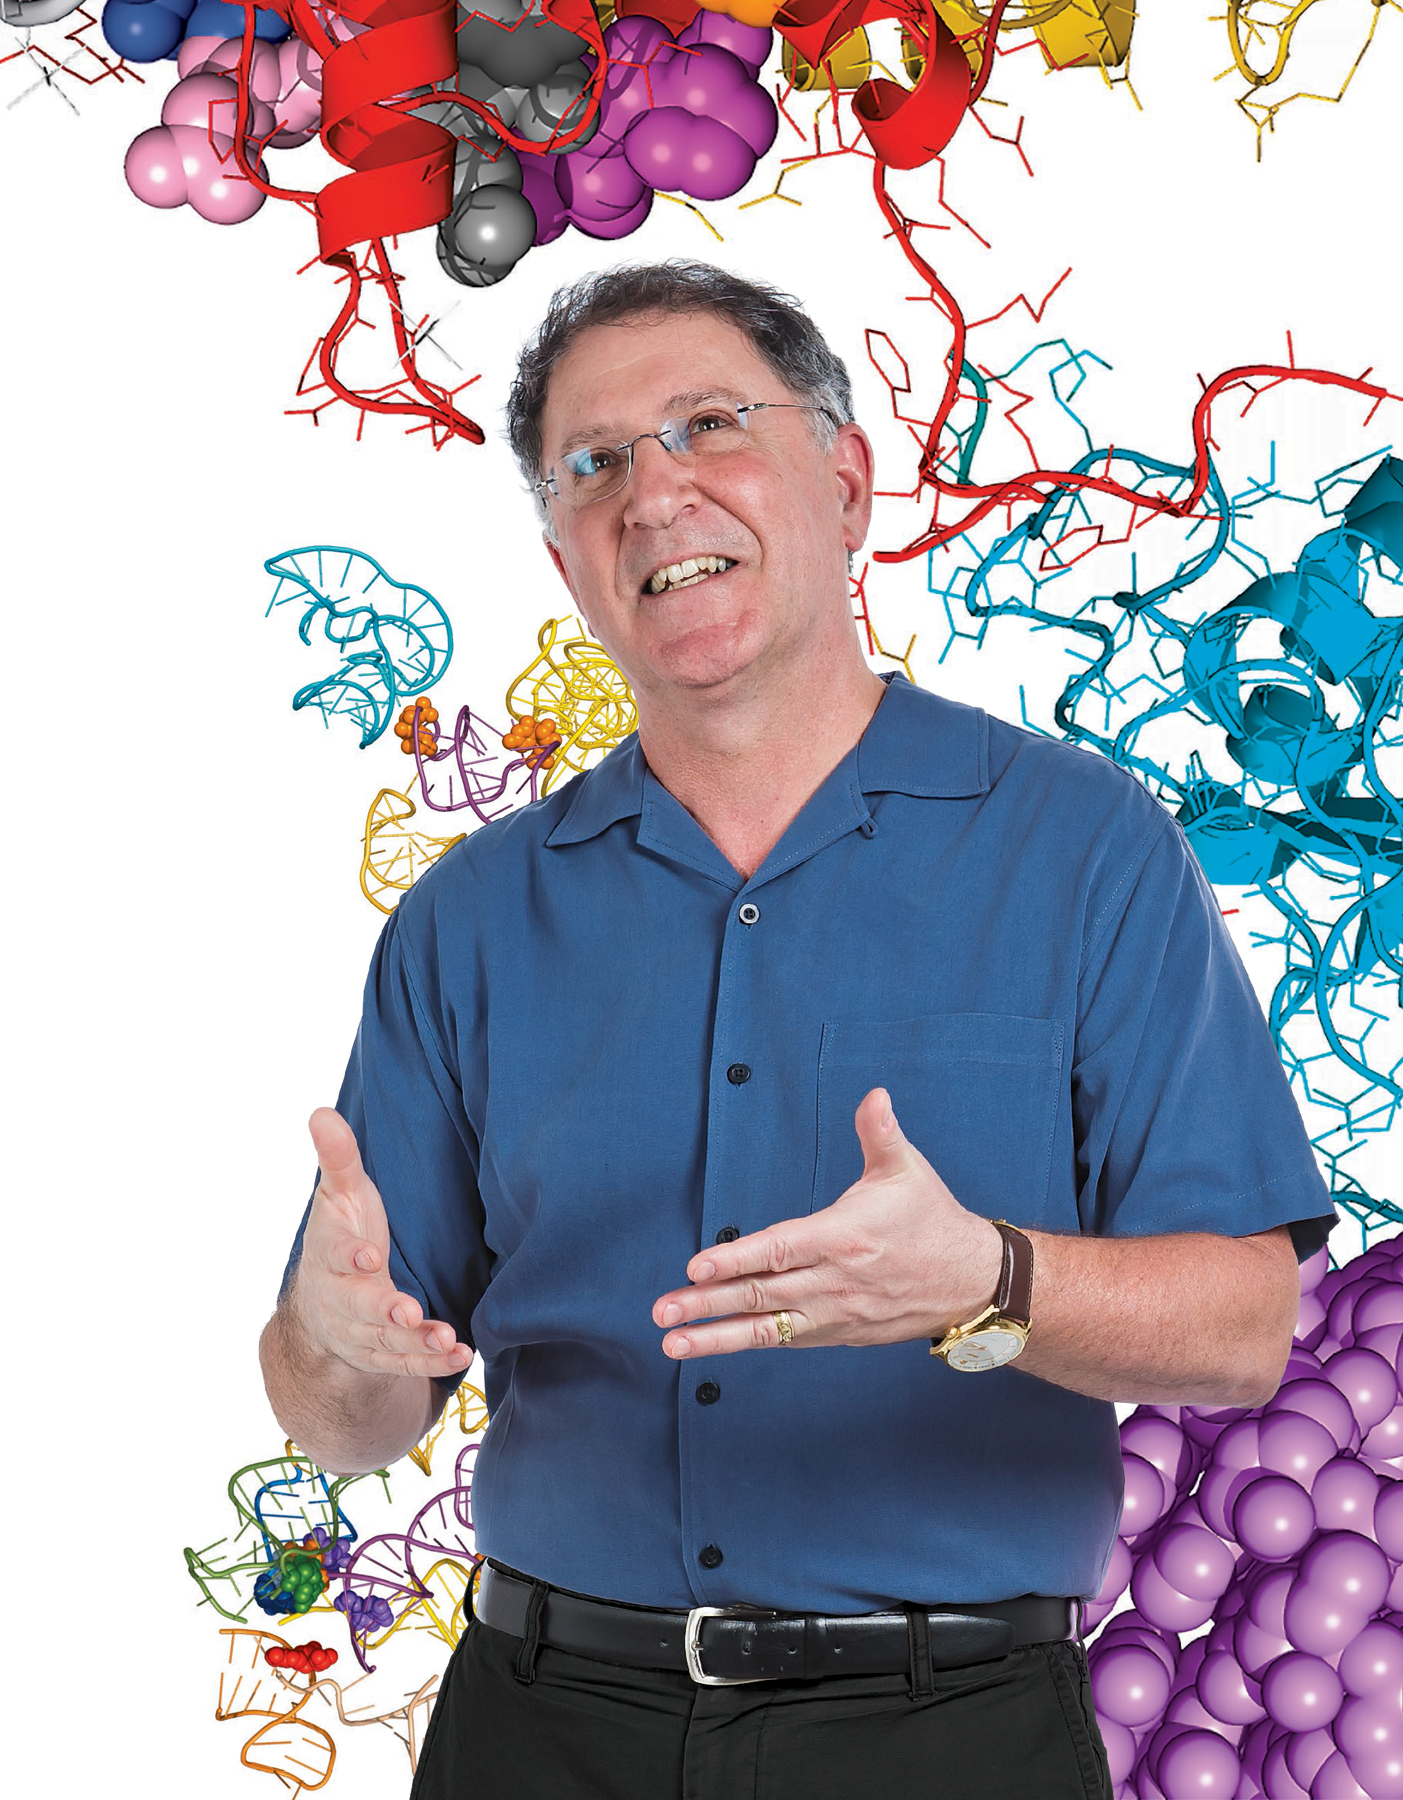 A photo illustration of Jon Dinman. He is wearing a blue polo shirt, smiling, and looking up. There is a tangle of colorful, 3D rendered RNA hanging above him and behind him.